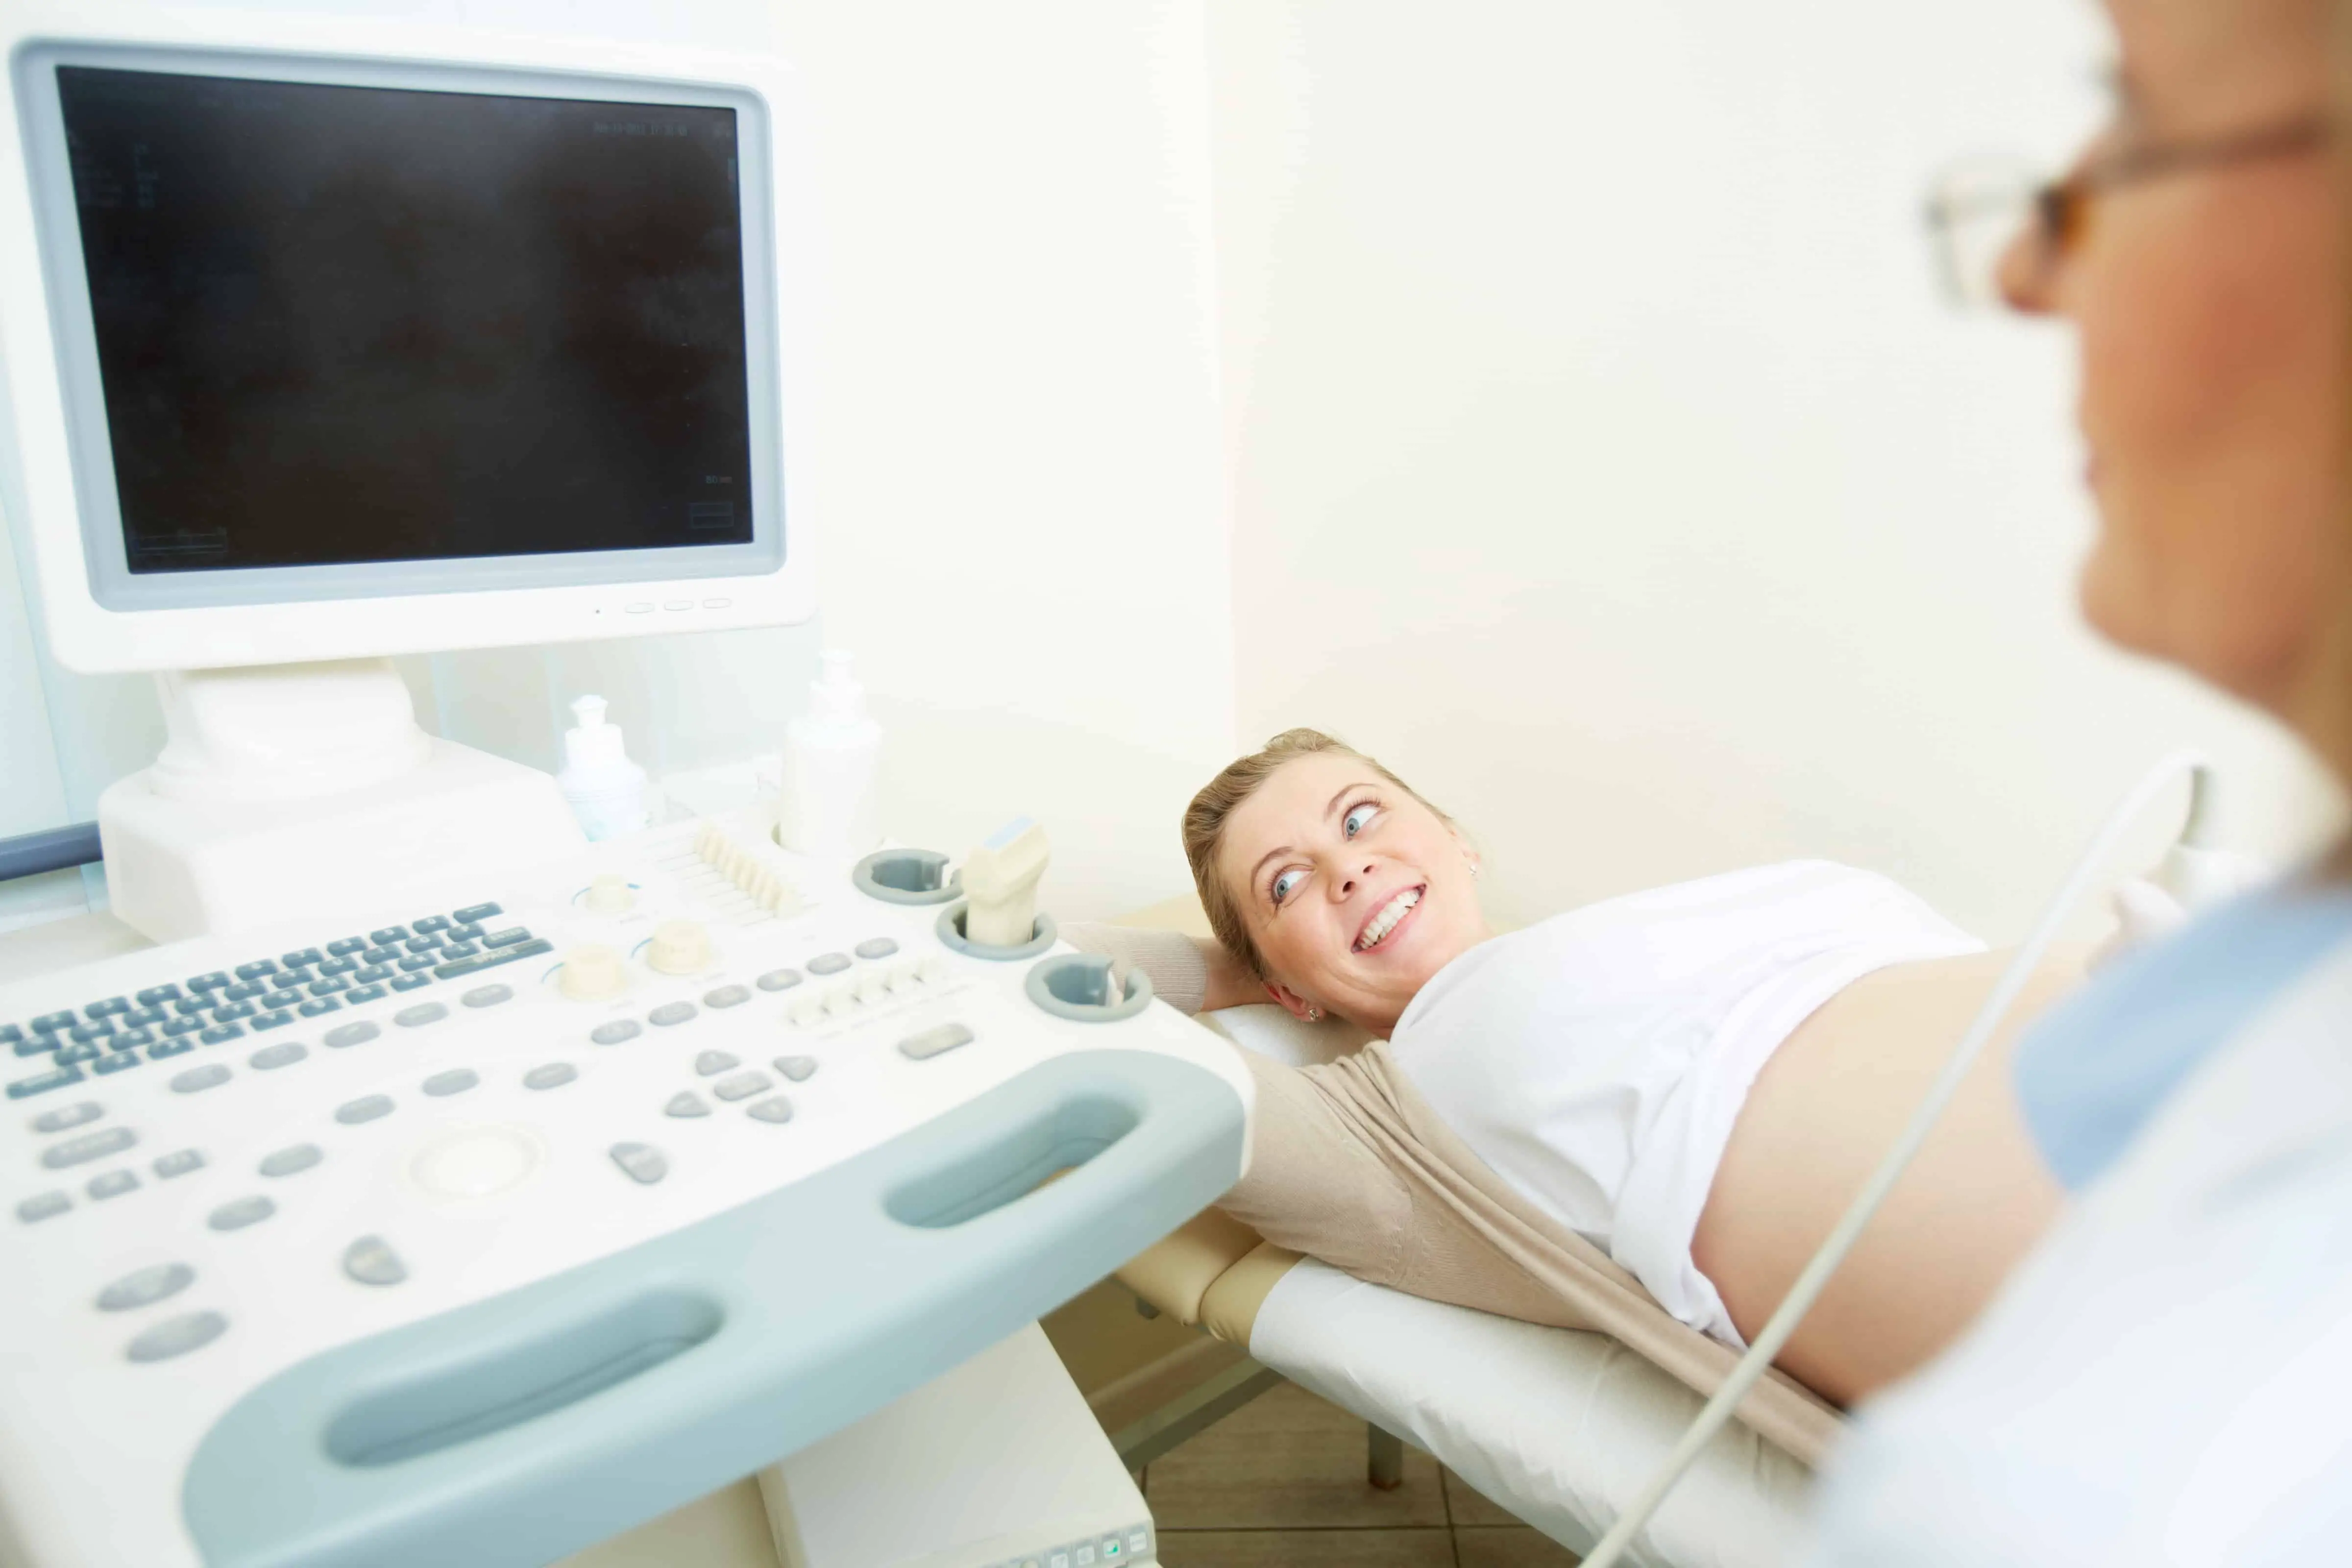 Types of Ultrasounds to Learn for Aspiring Ultrasound Technicians